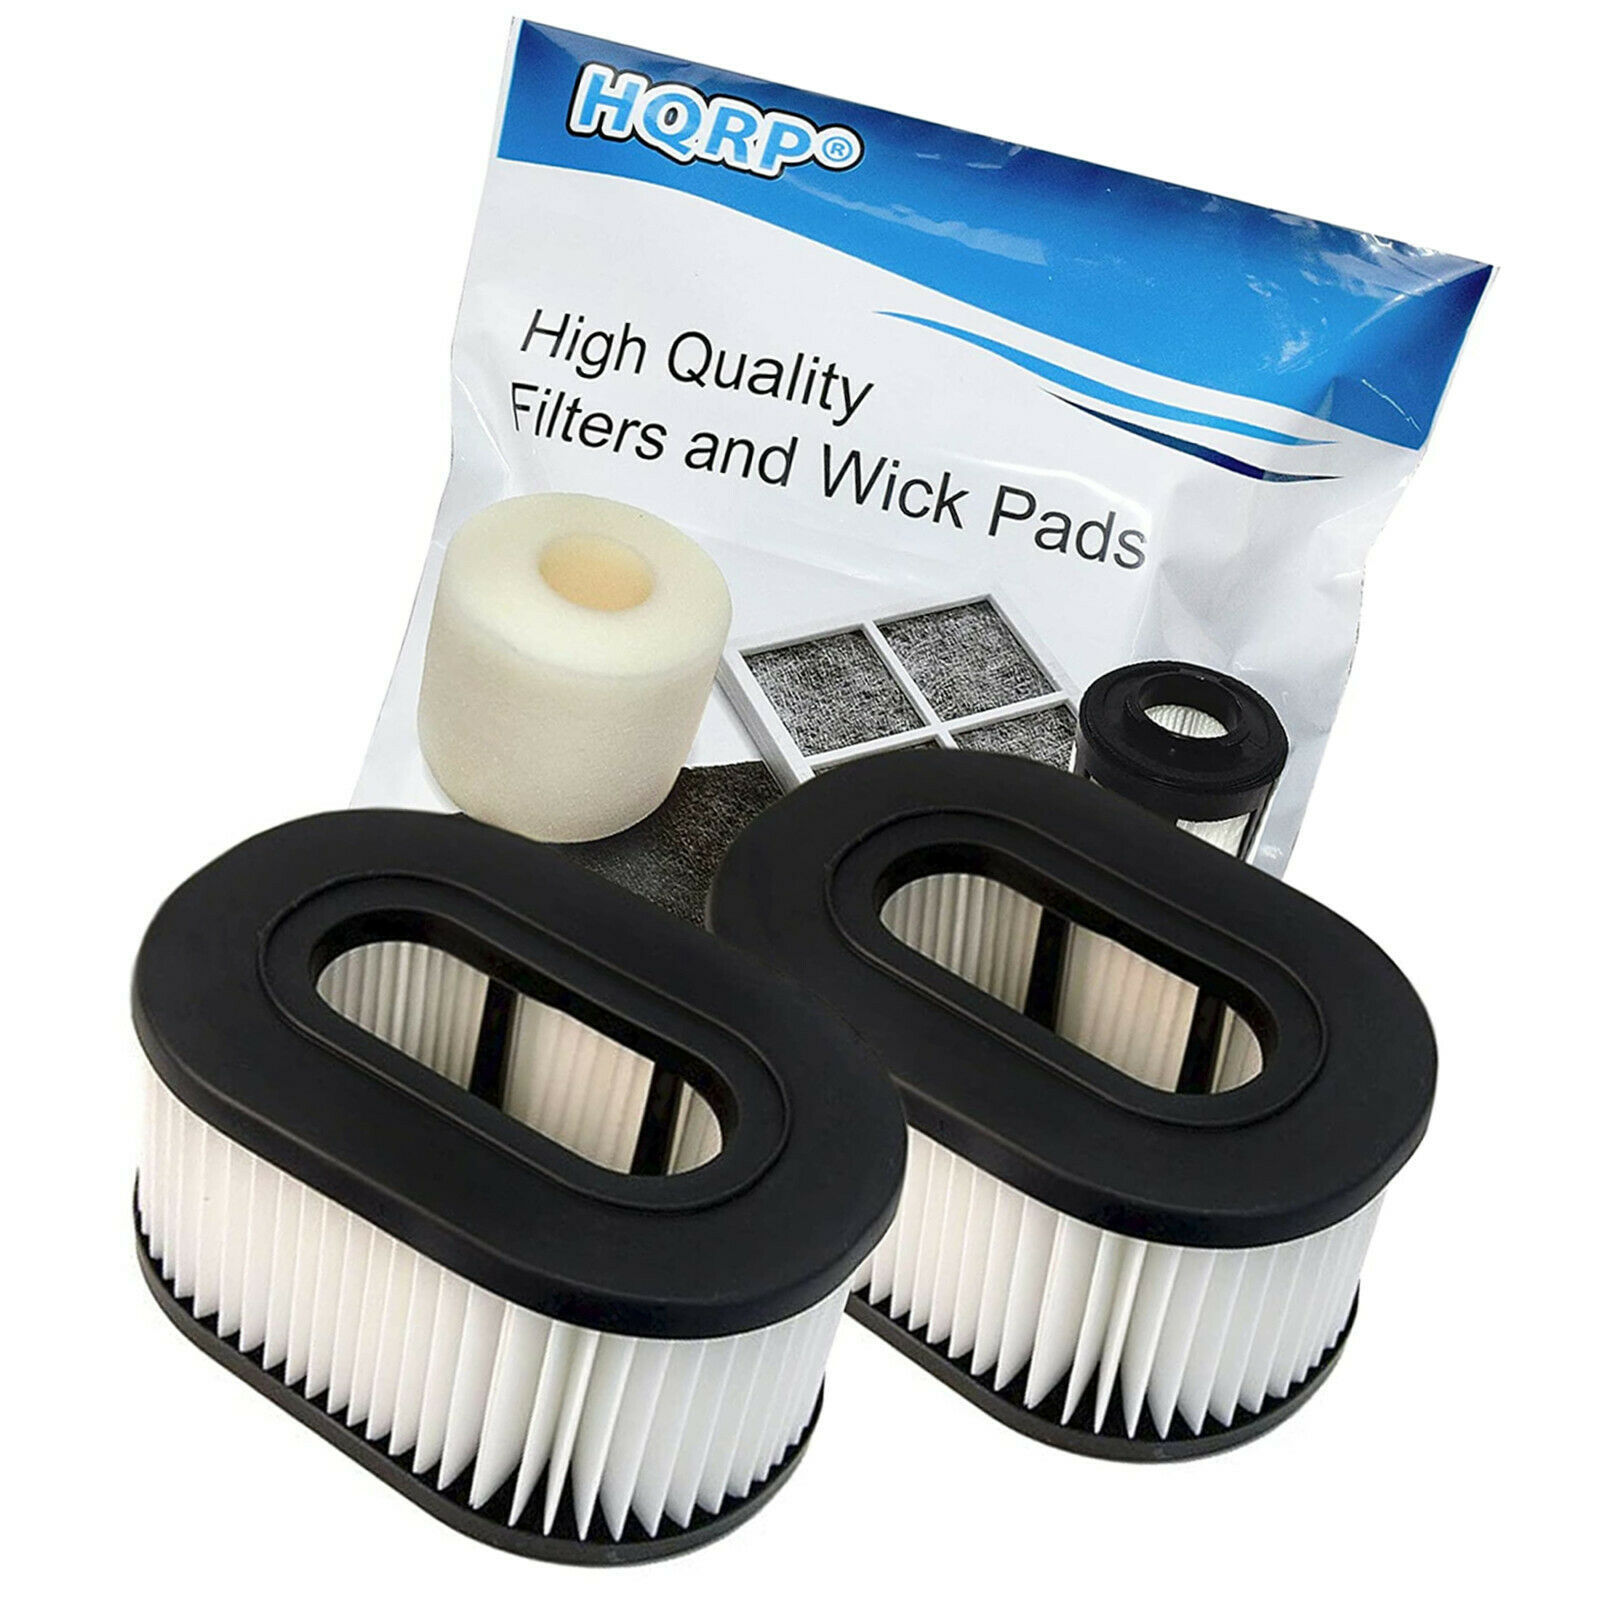 HQRP Washable Hepa H12 Filter for Hoover Fold Away Widepath Bagless Upright 